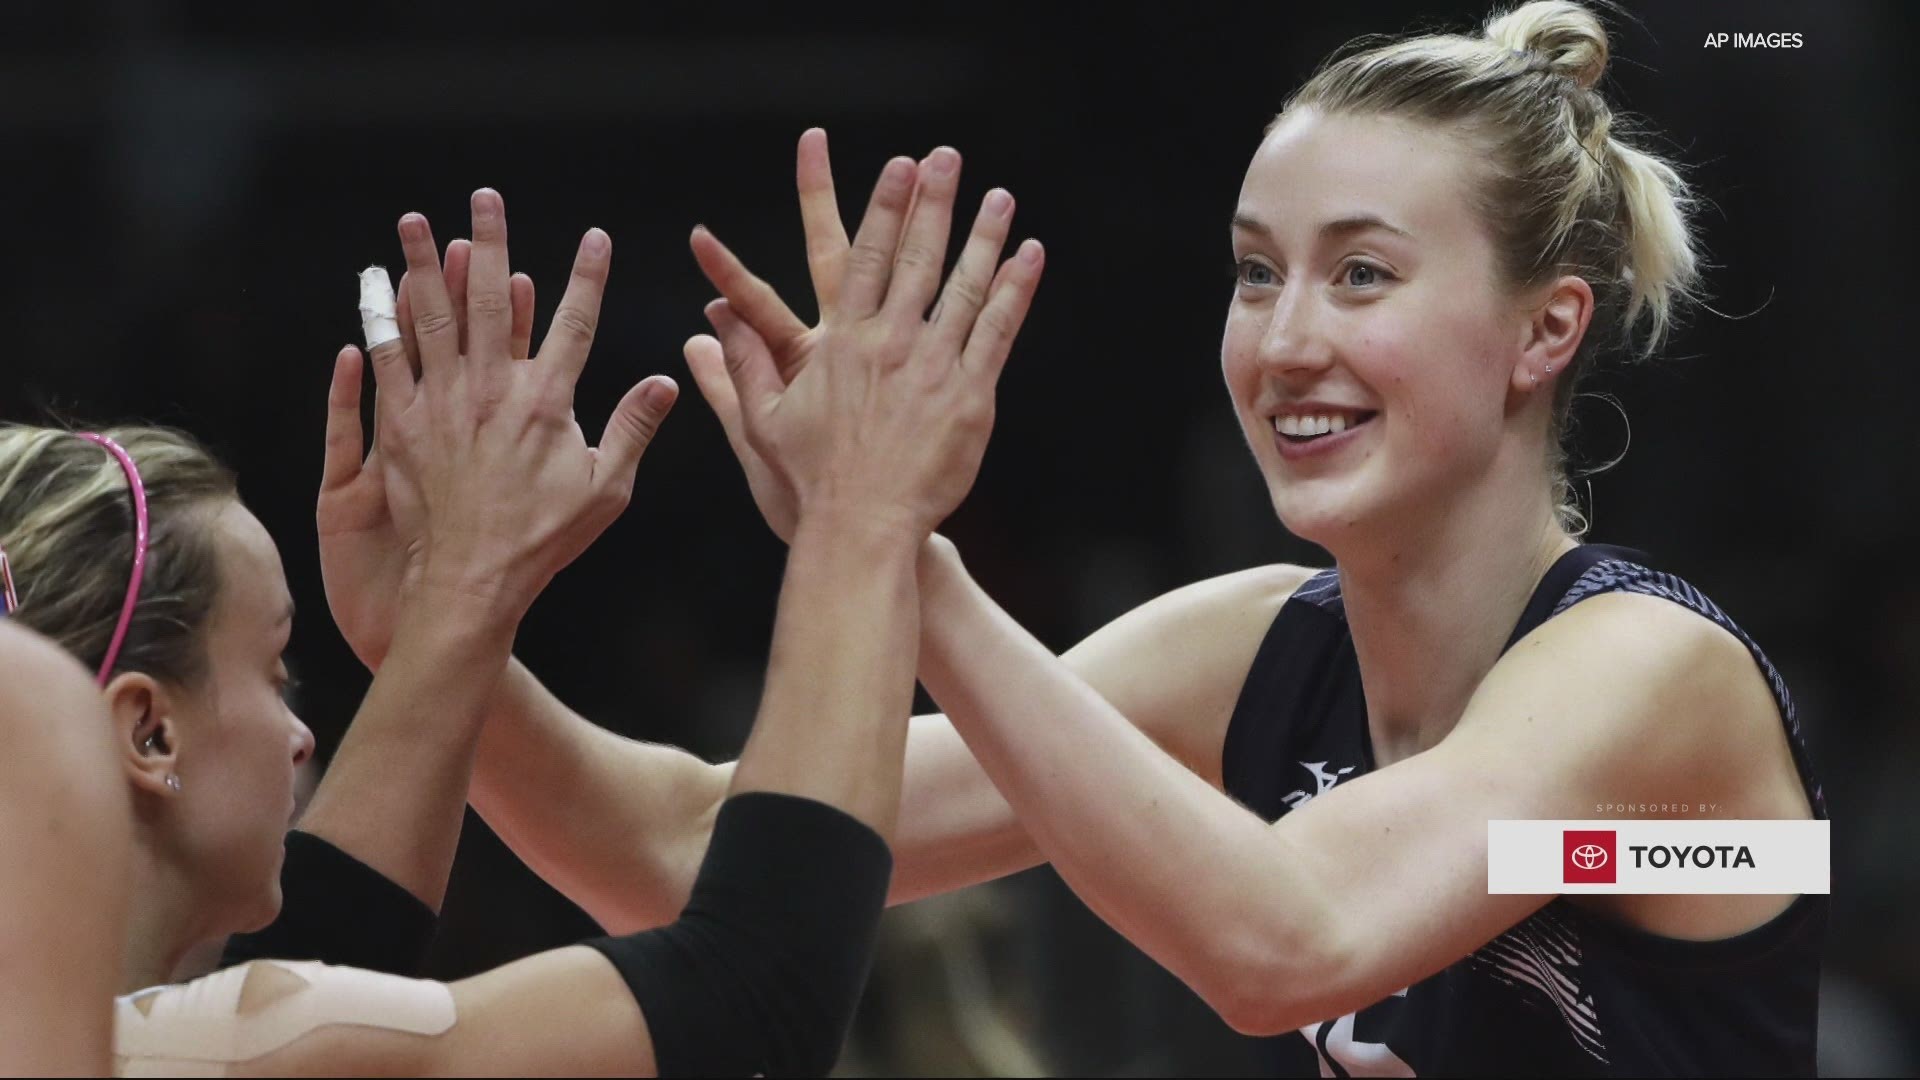 Portland's Kim Hill has one goal: Bring home the gold in women's volleyball.